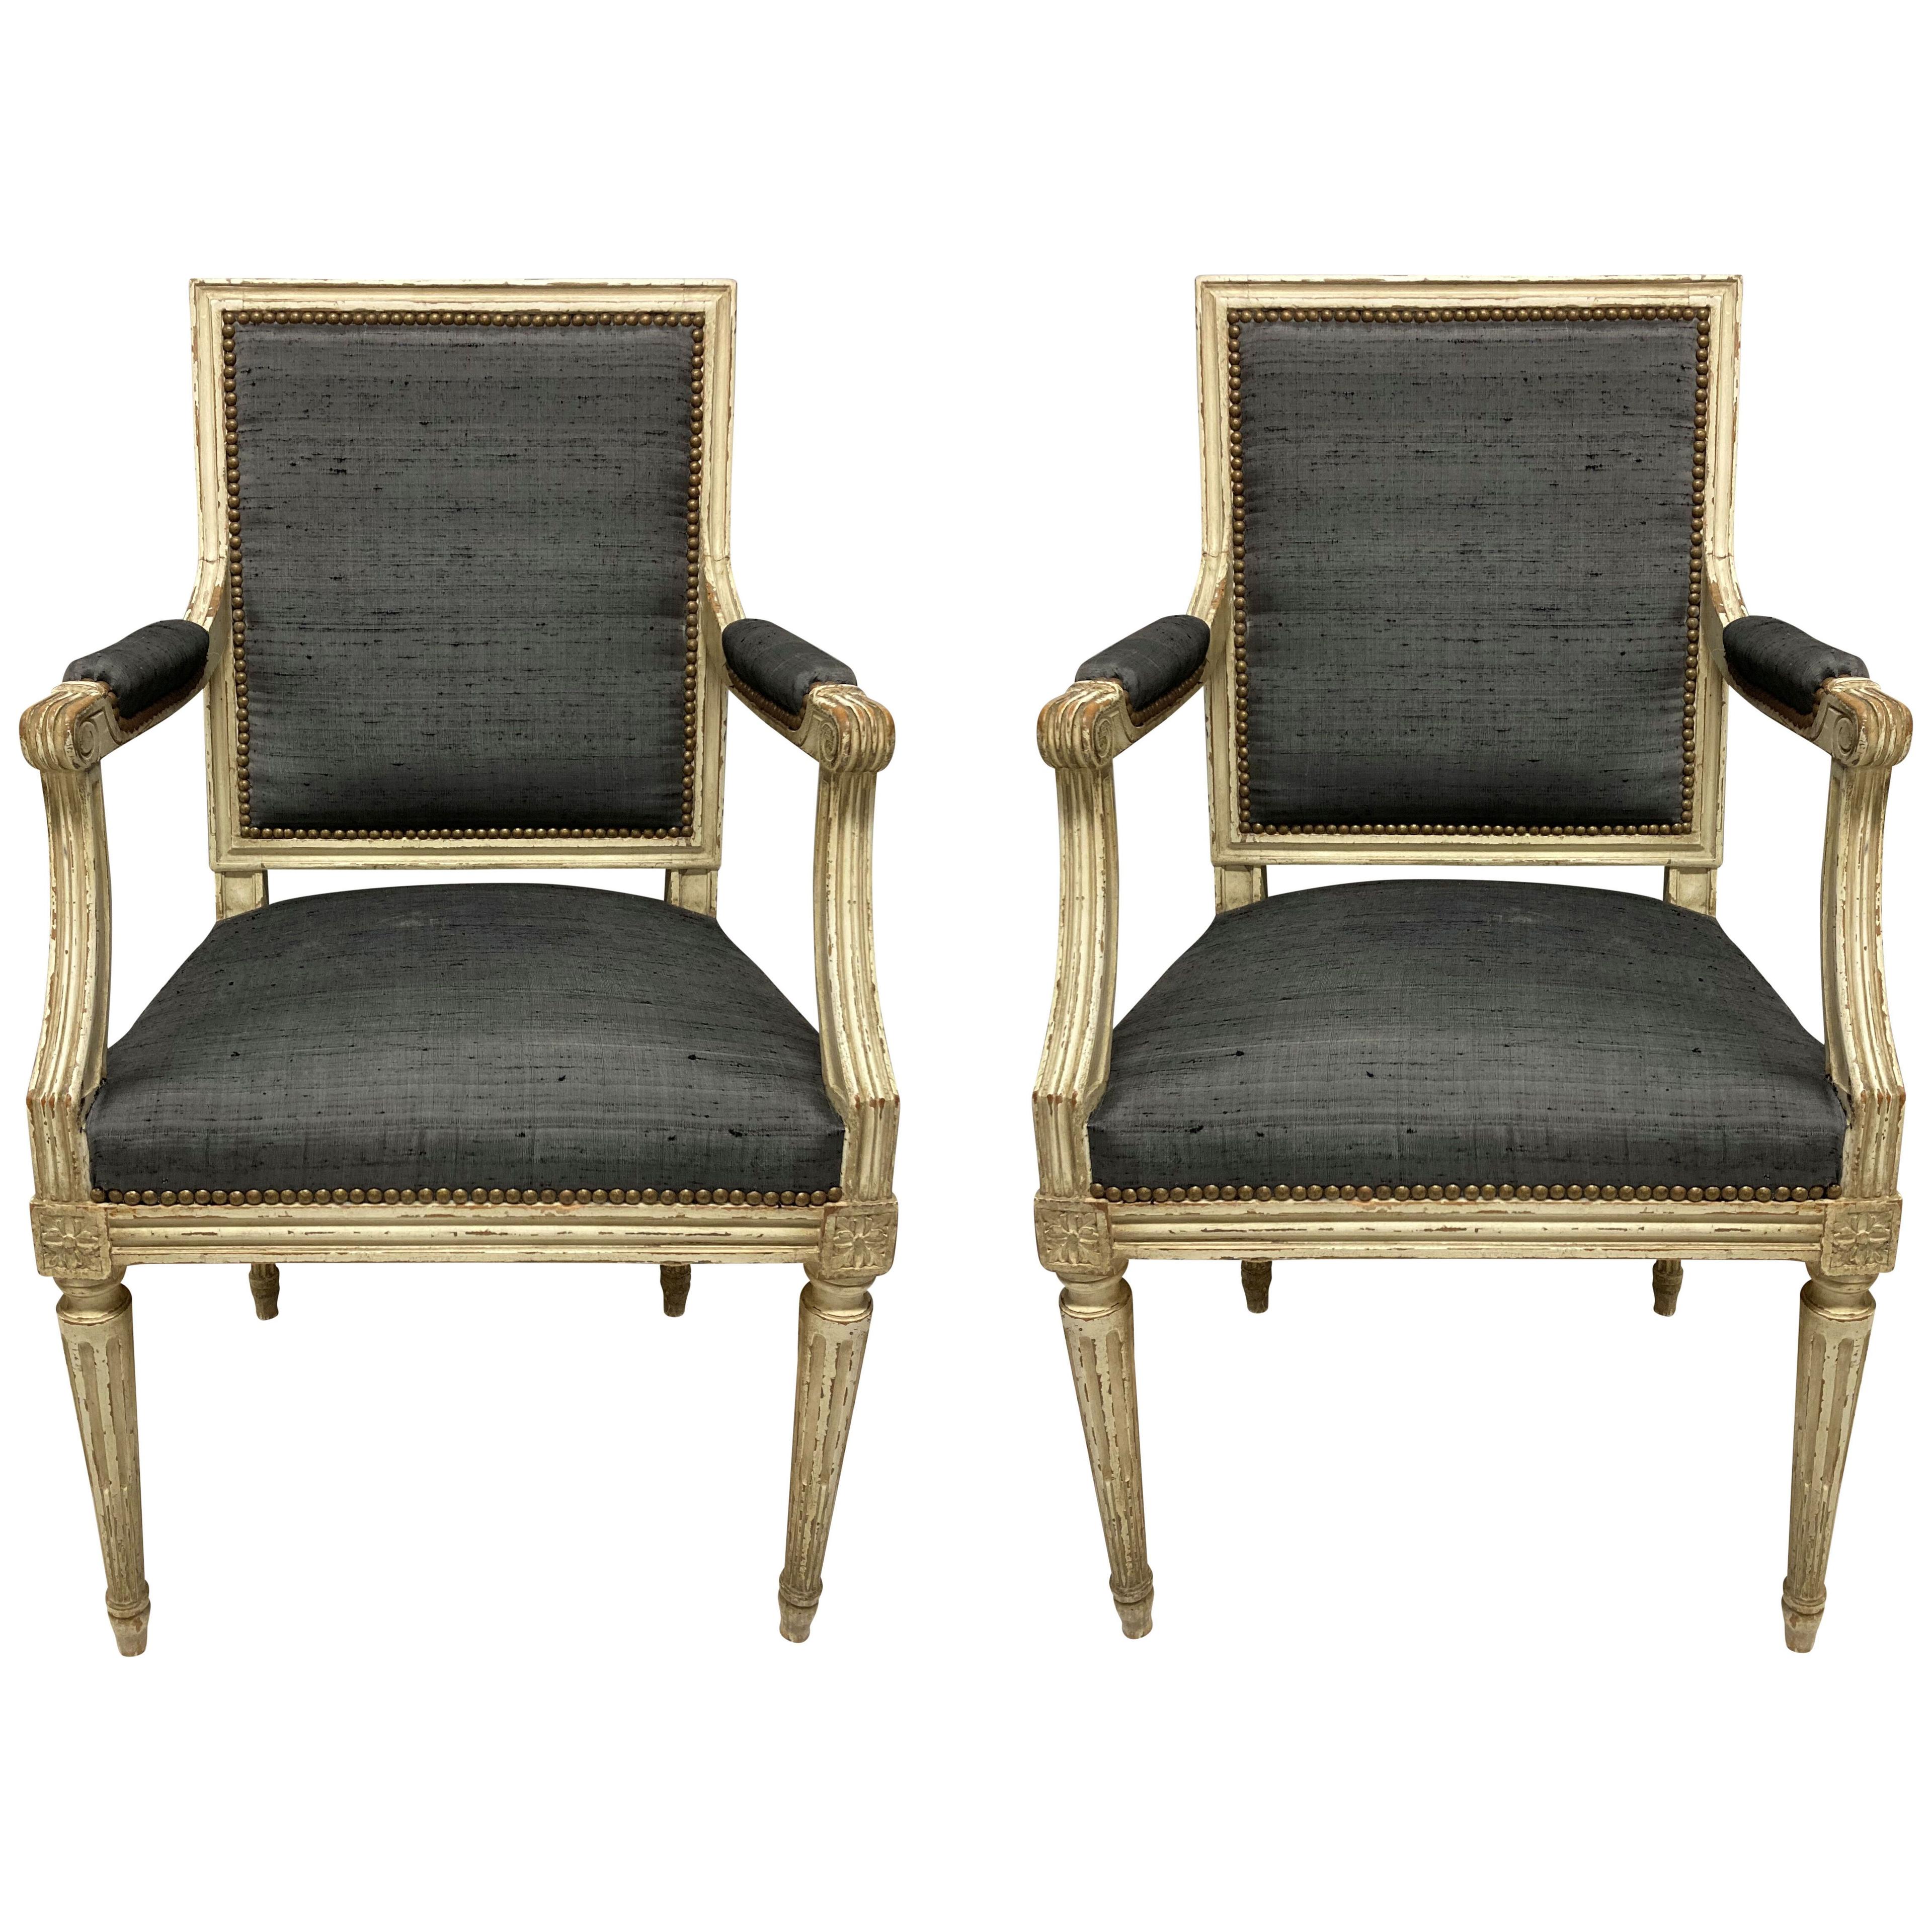 A PAIR OF PAINTED LOUIS XVI STYLE ARMCHAIRS